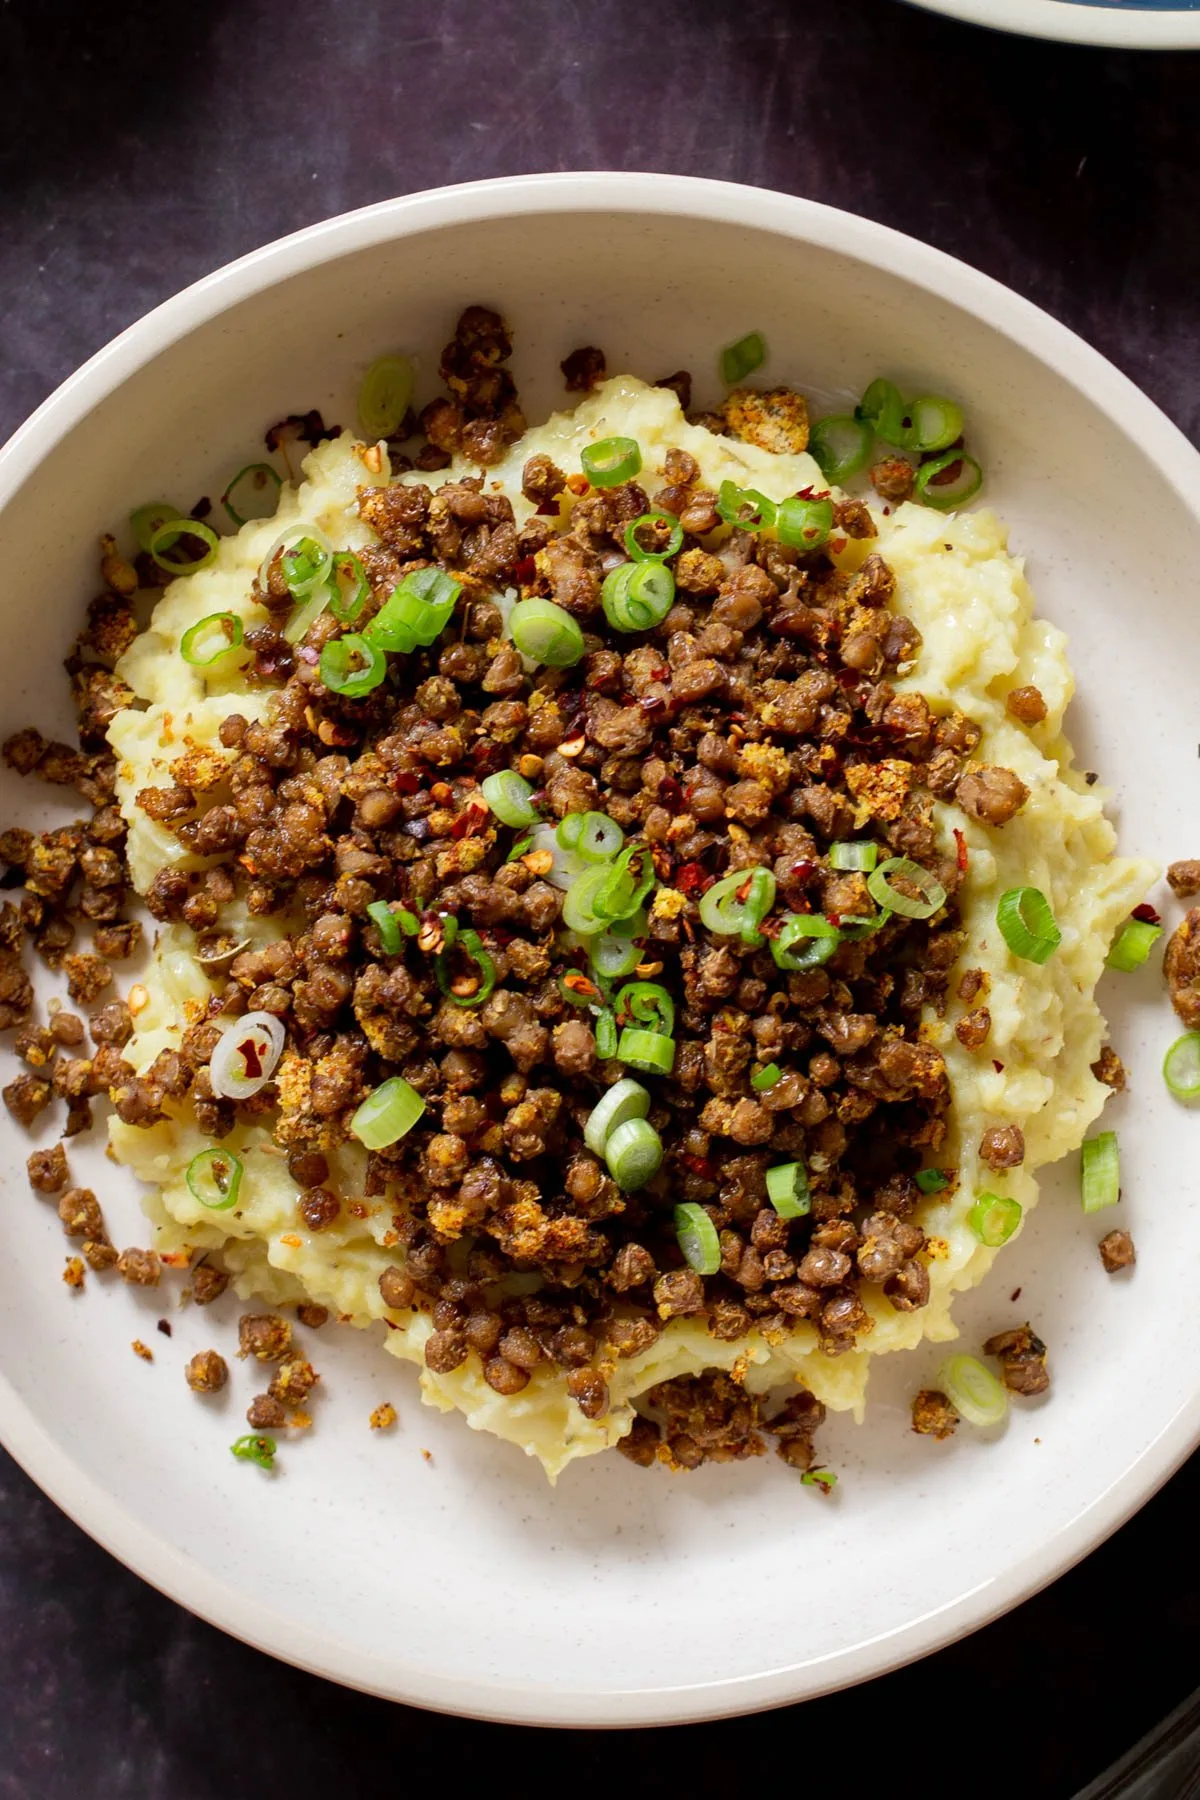 Popped Lentils with Mashed Potatoes